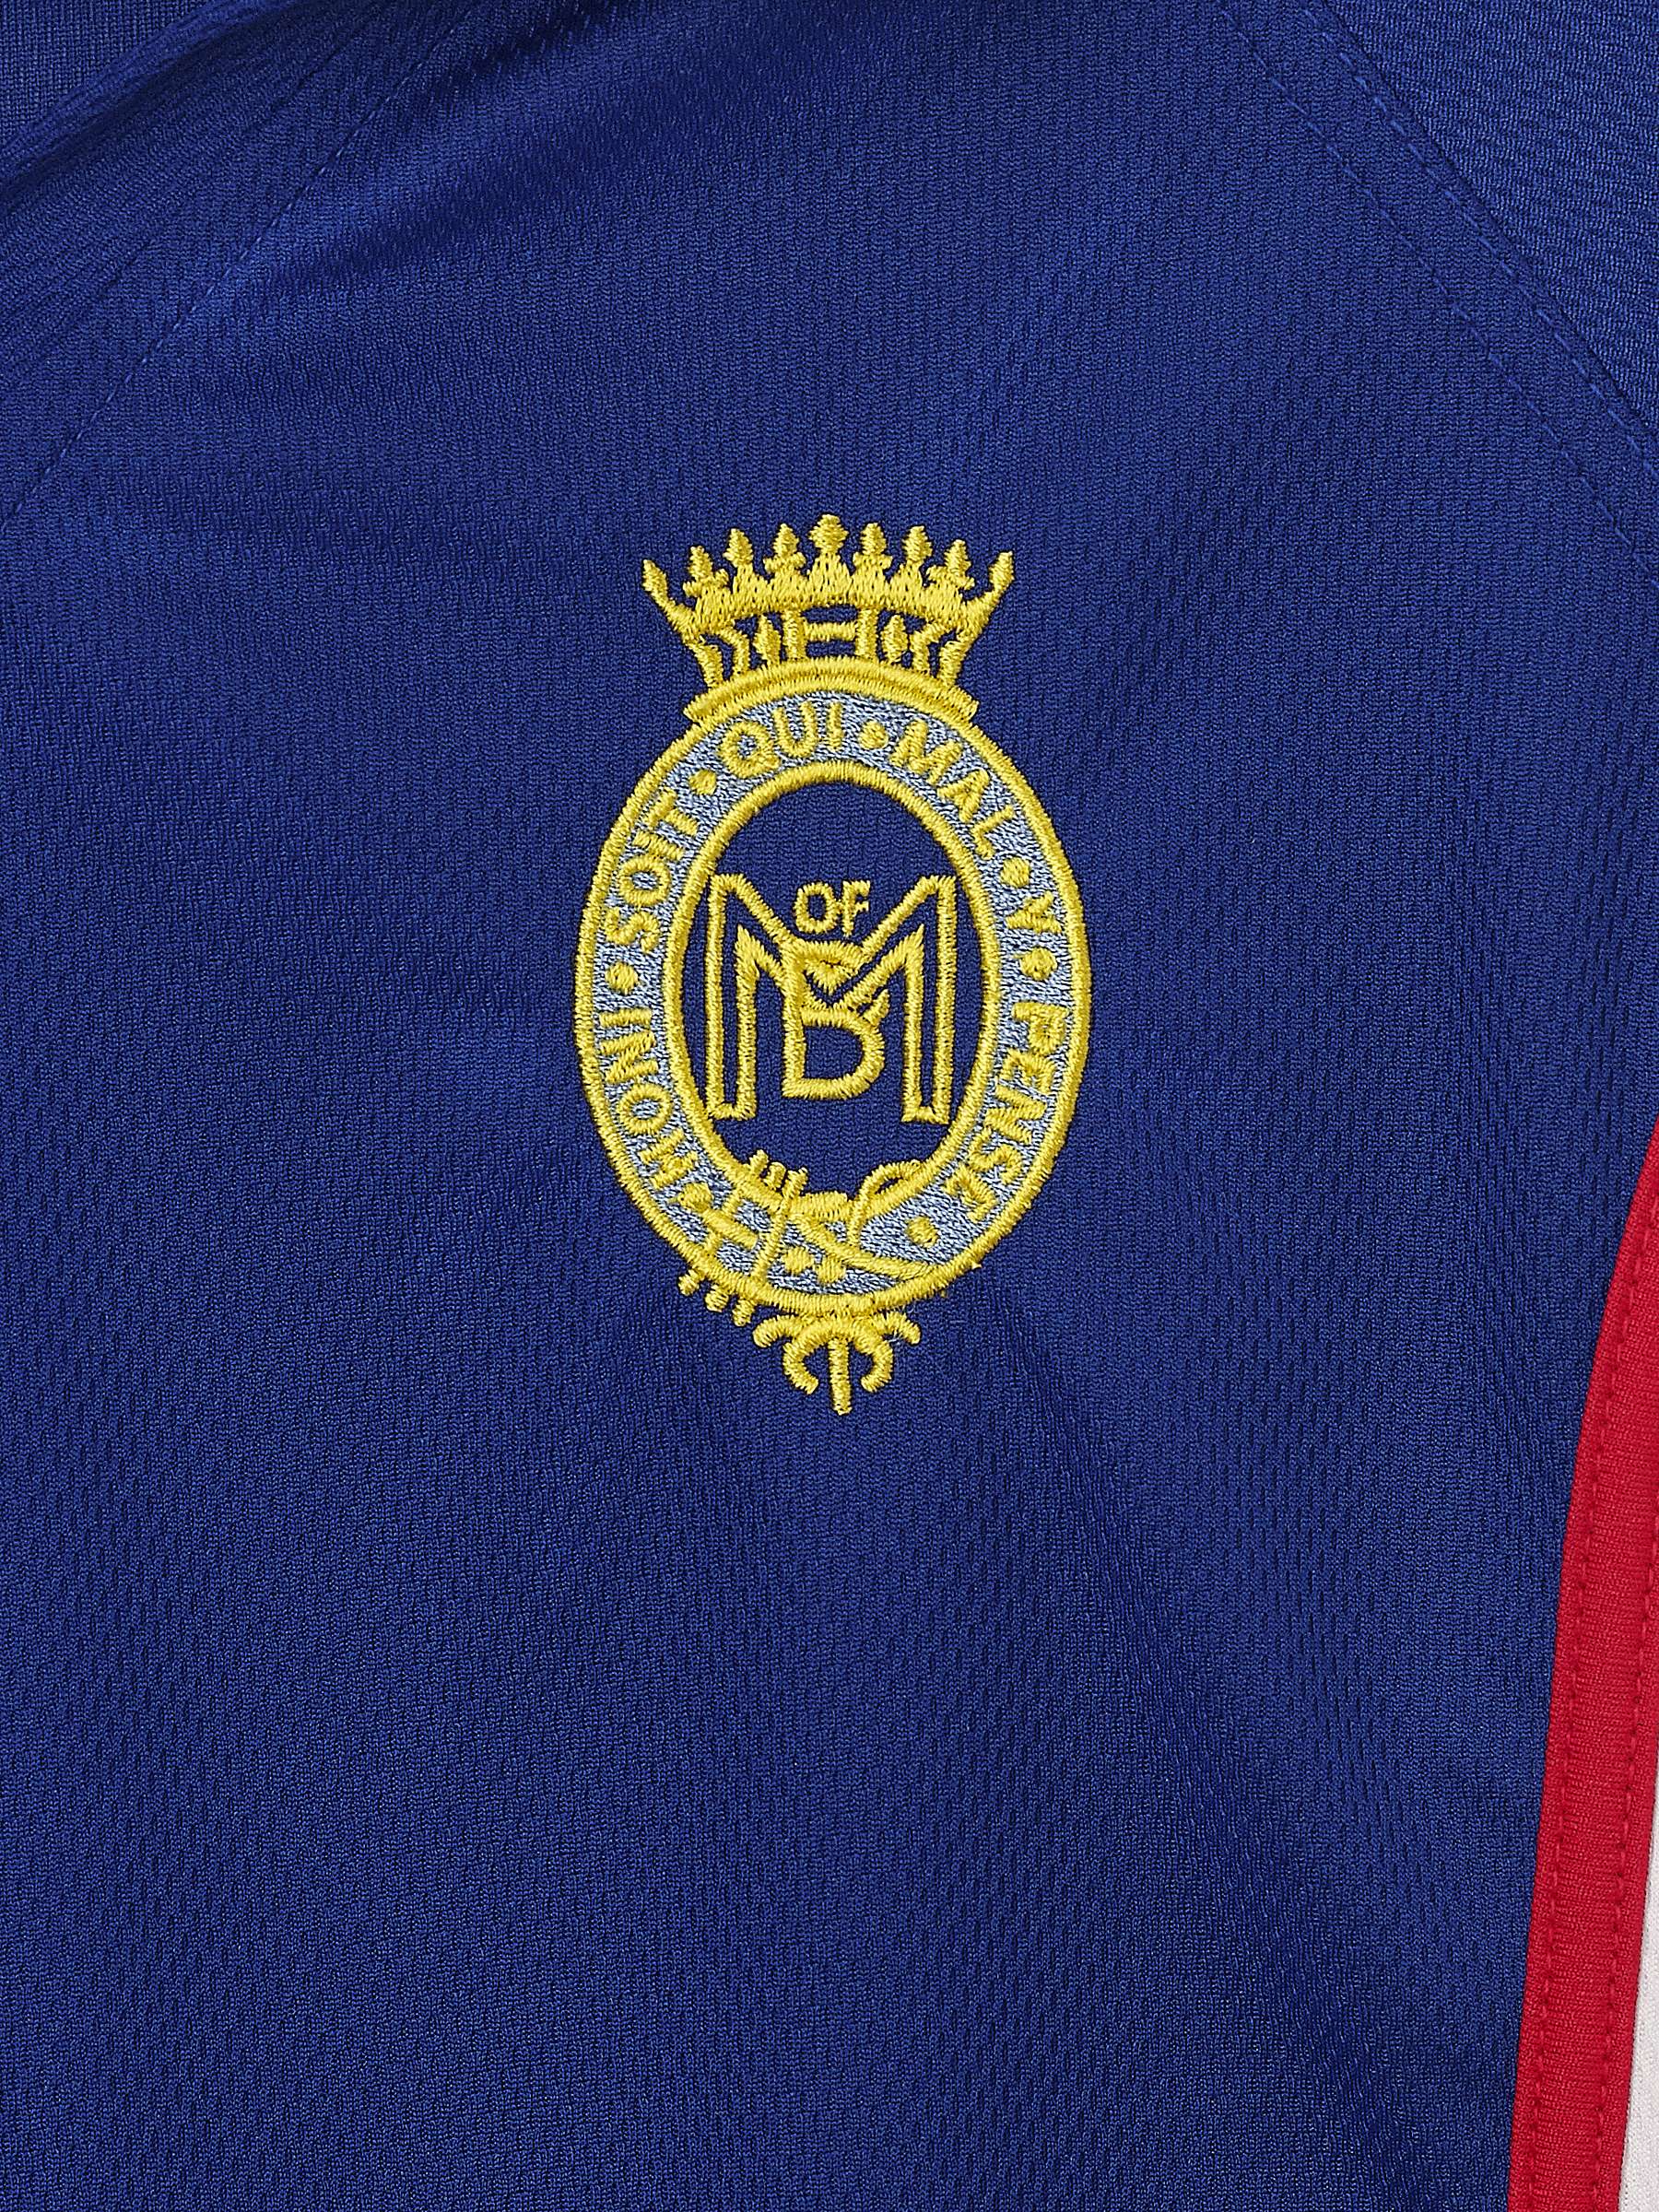 Buy The Mountbatten School Girls' Fitted Sports Polo Shirt Online at johnlewis.com